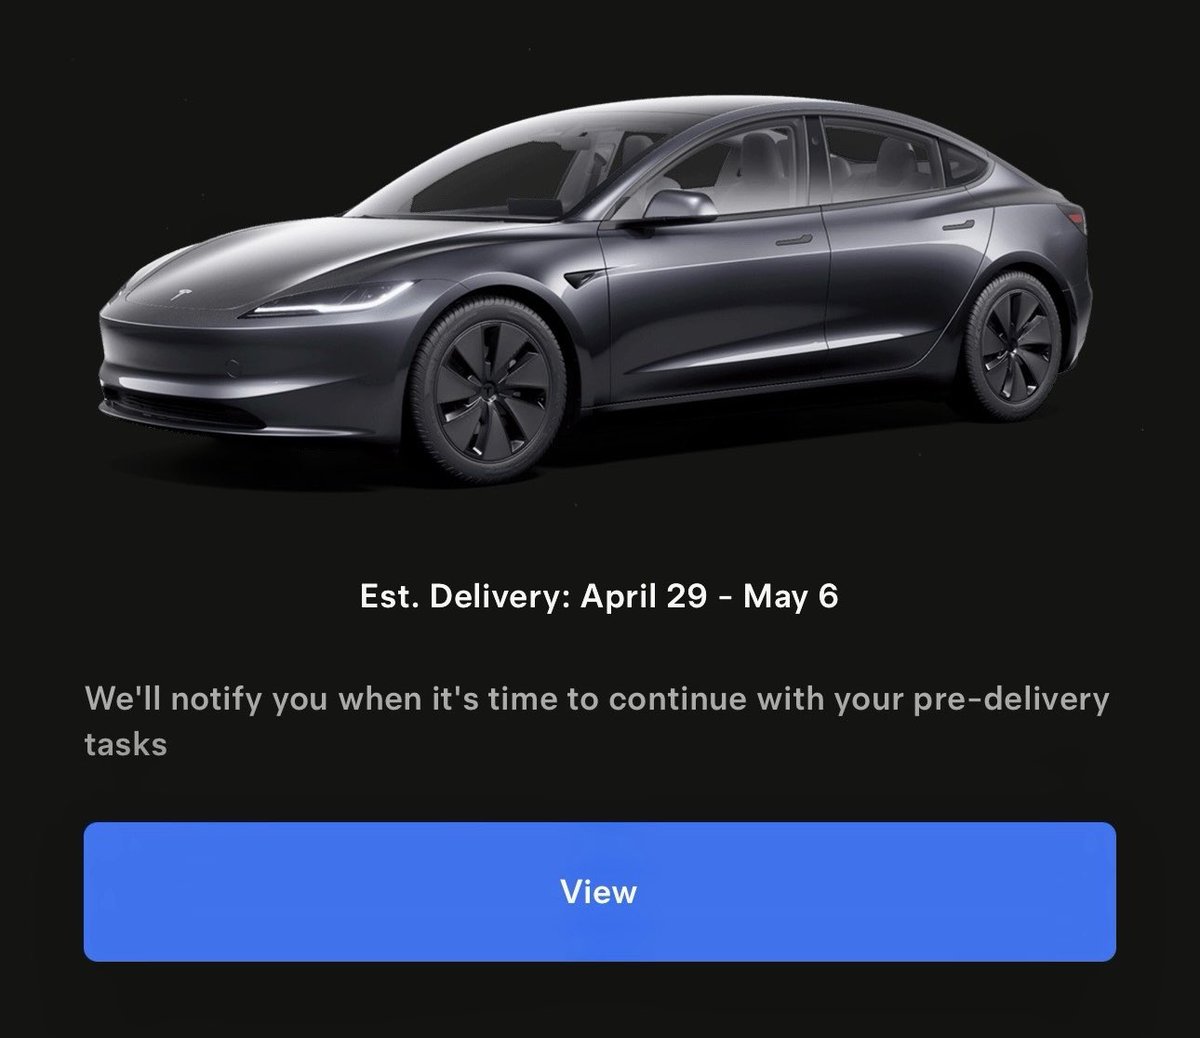 Just ordered my new Model 3 LR. Fell in love instantly after my test drive. So many amazing upgrades in the 2024 model and the premium audio system is unmatched. Going to be posting some content highlighting some of these features when it arrives. $TSLA